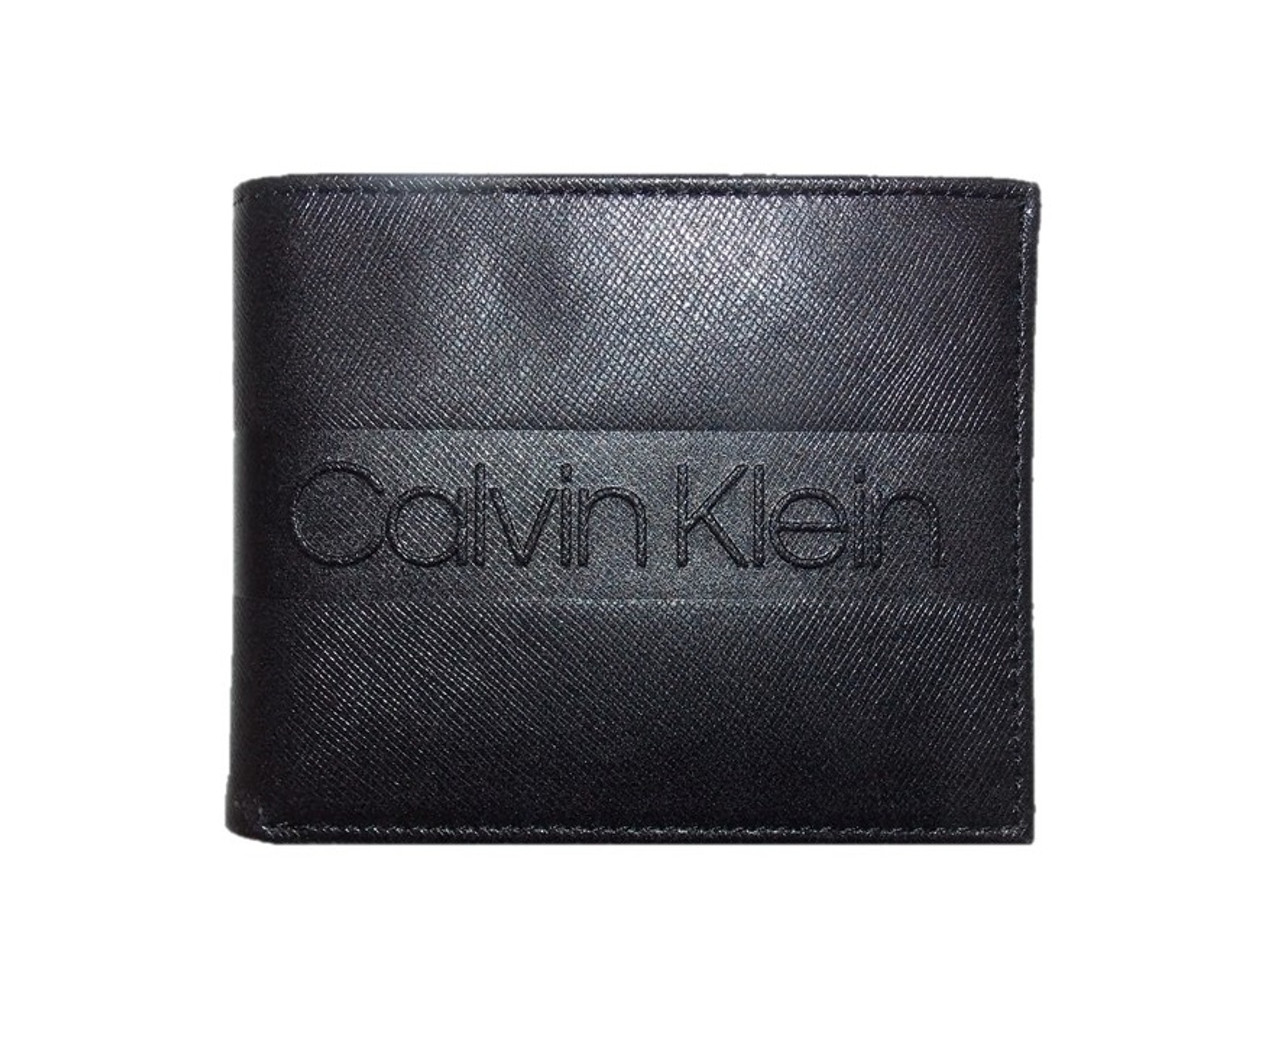 all calvin klein products